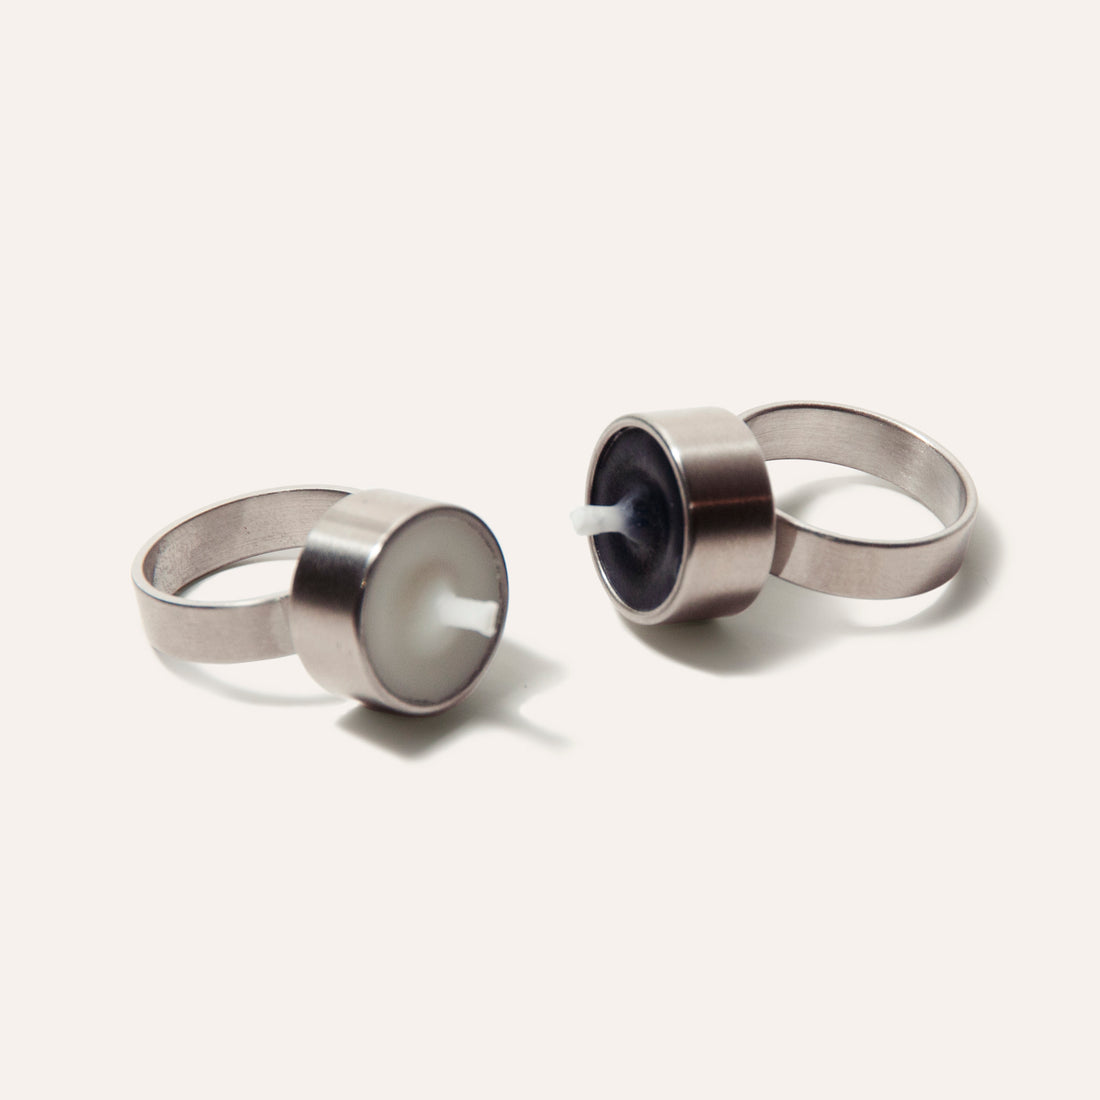 Wask Studio / A New Flame Ring